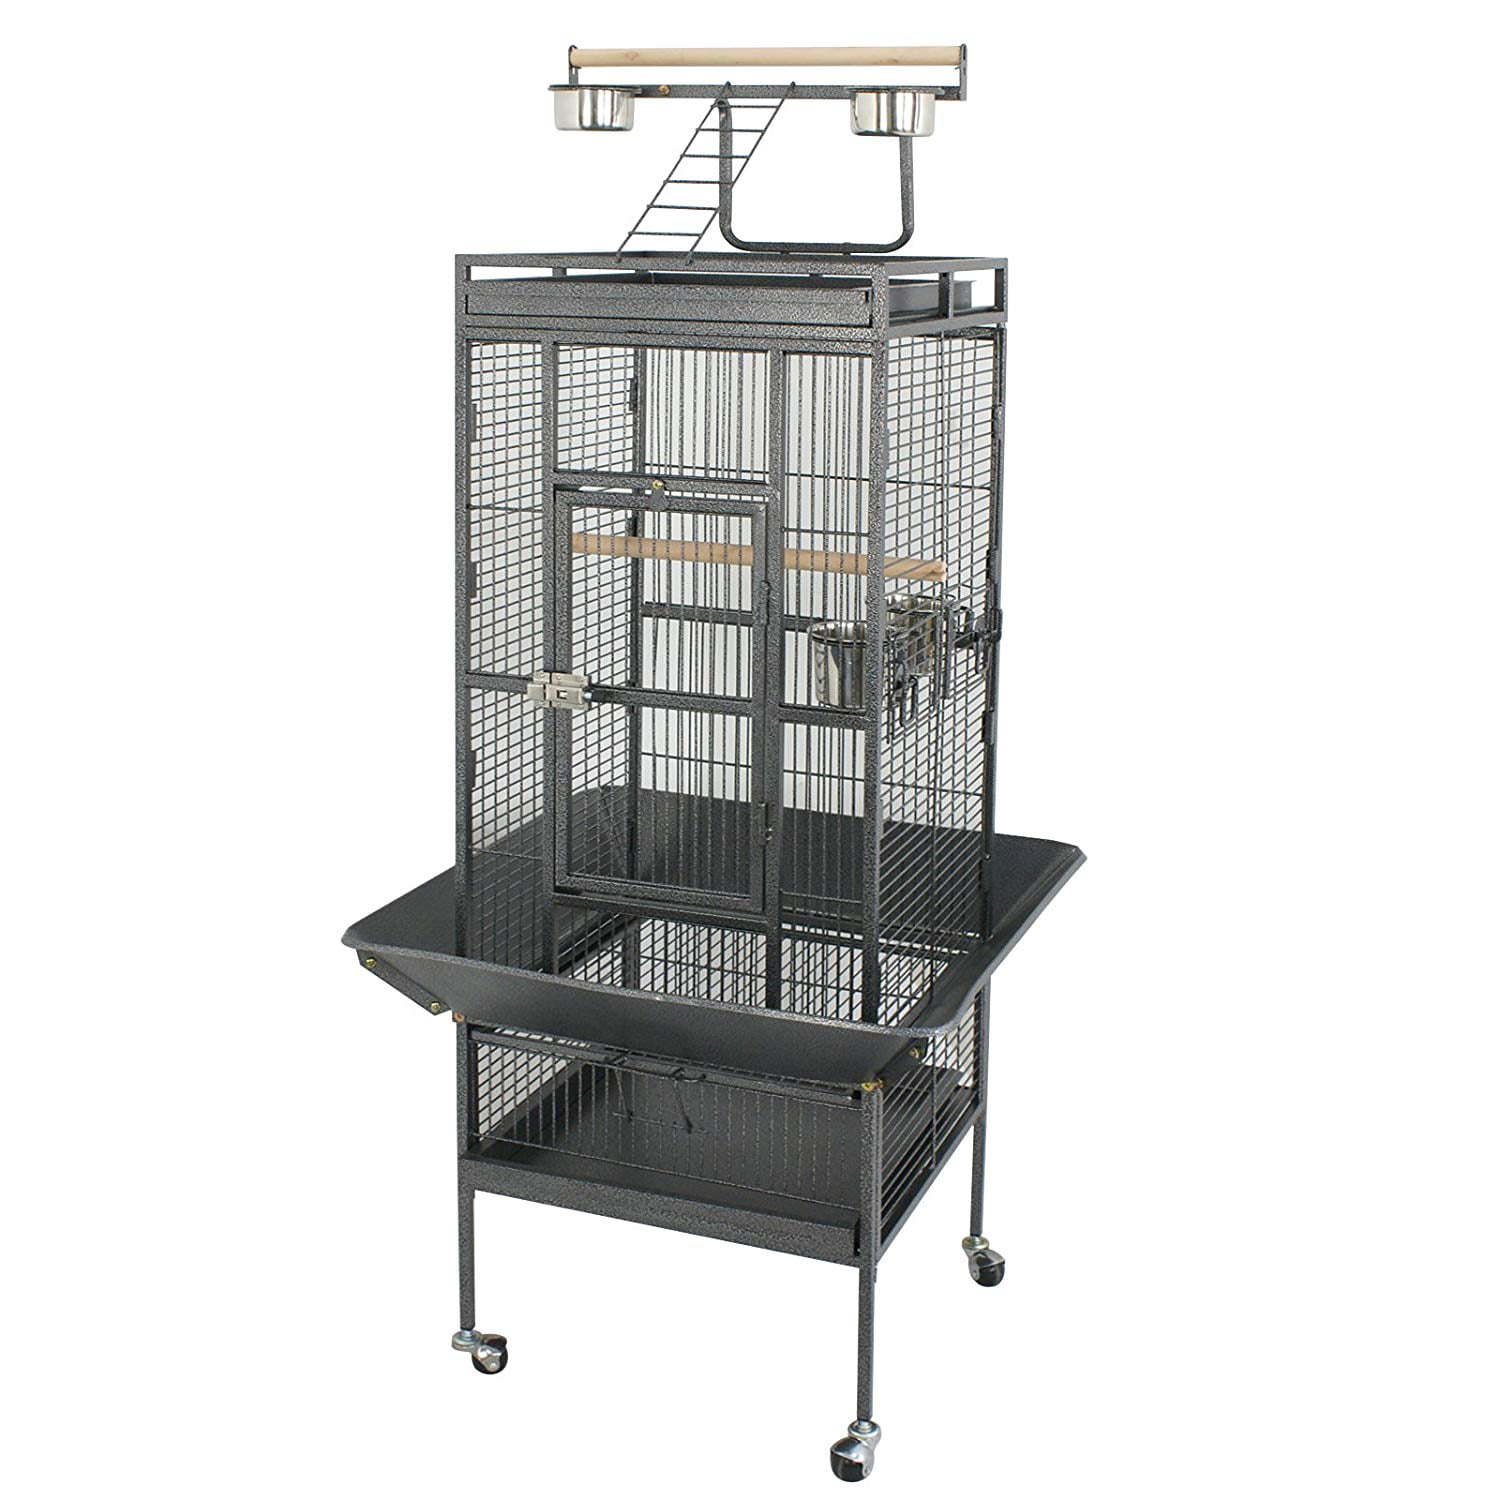 Bird Cage Large Play Top Bird Parrot Finch Cage Macaw Cockatoo Pet Supplies 53" 